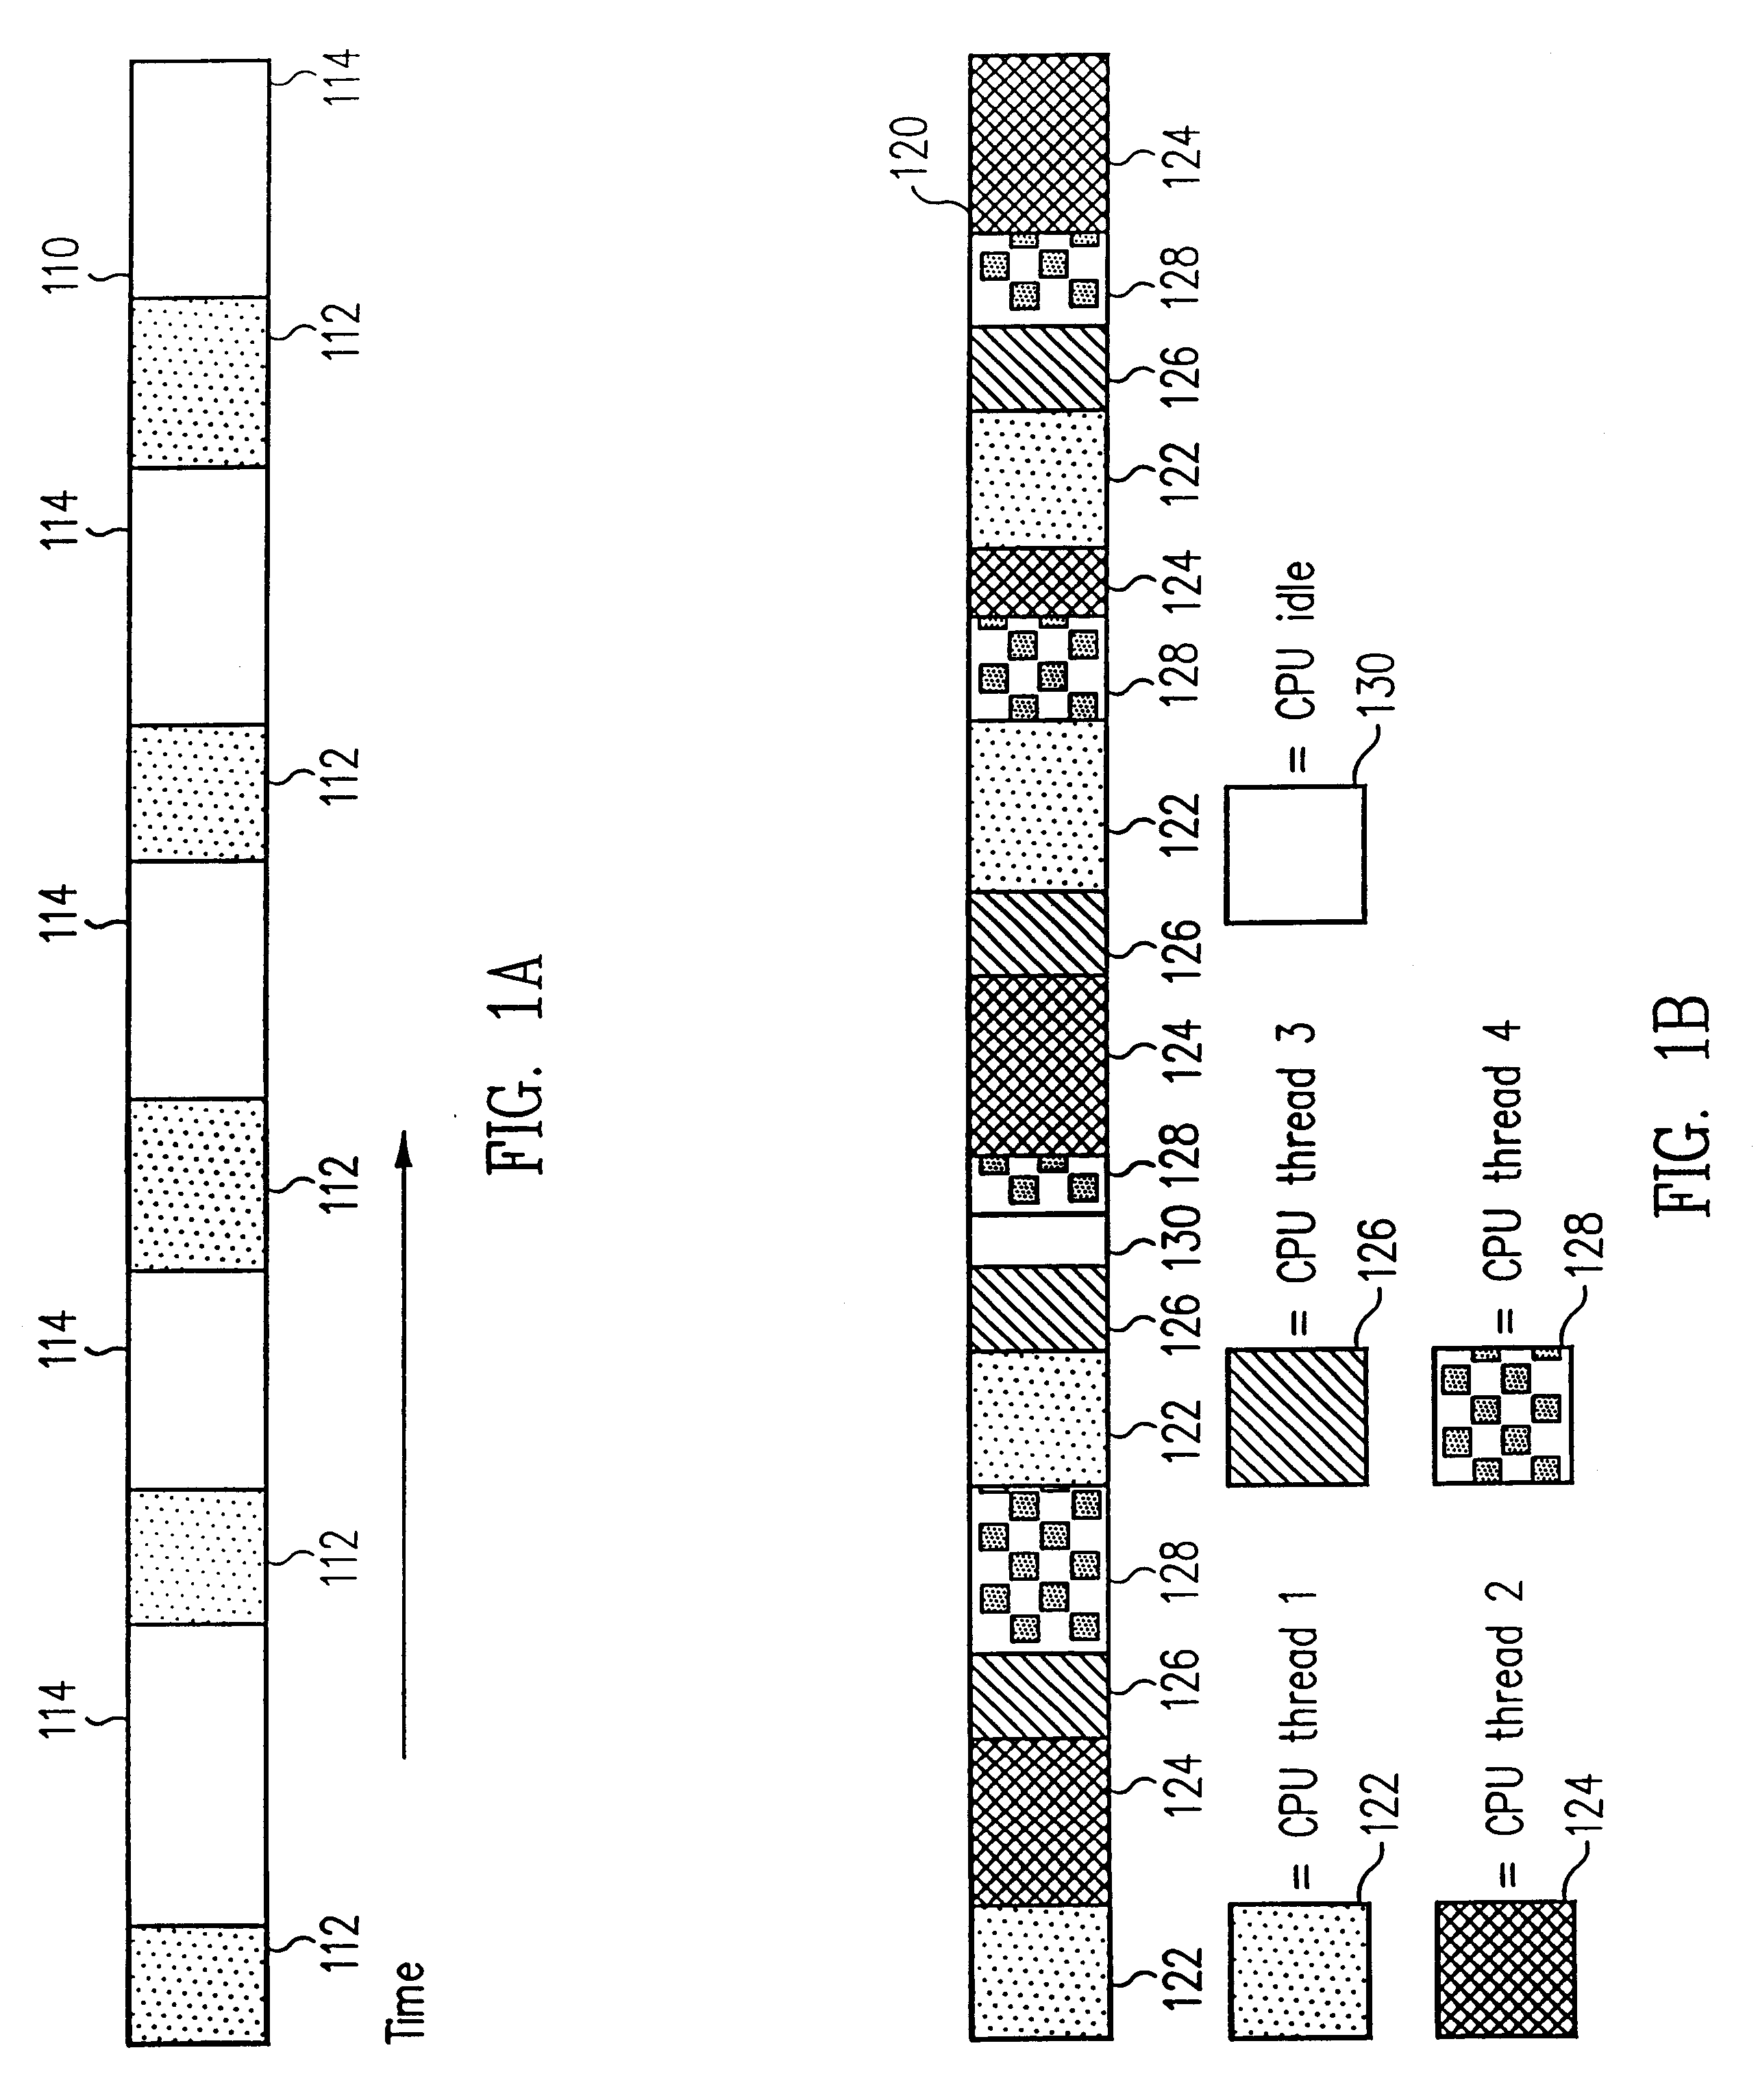 Vertically and horizontally threaded processor with multidimensional storage for storing thread data